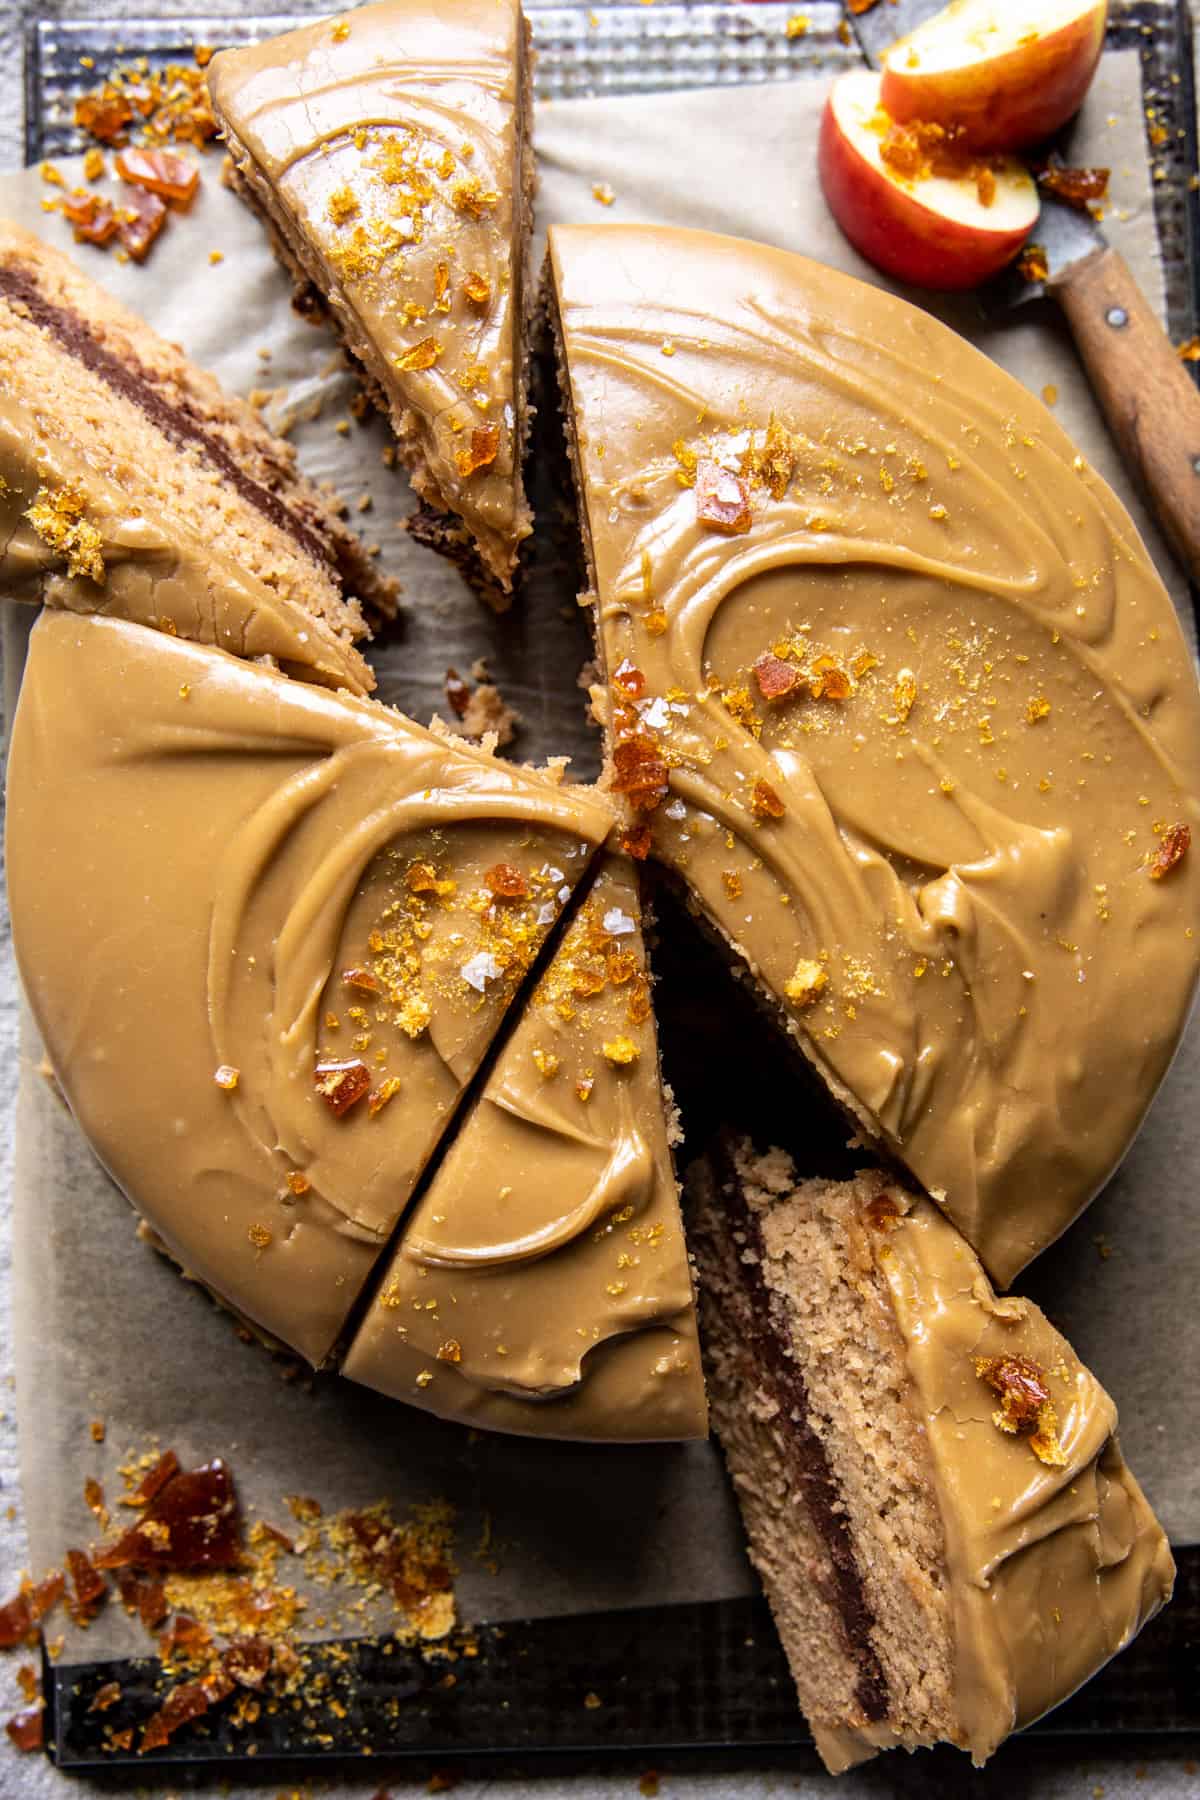 Old Fashioned Caramel Apple Butter Cake with Chocolate Frosting | halfbakedharvest.com